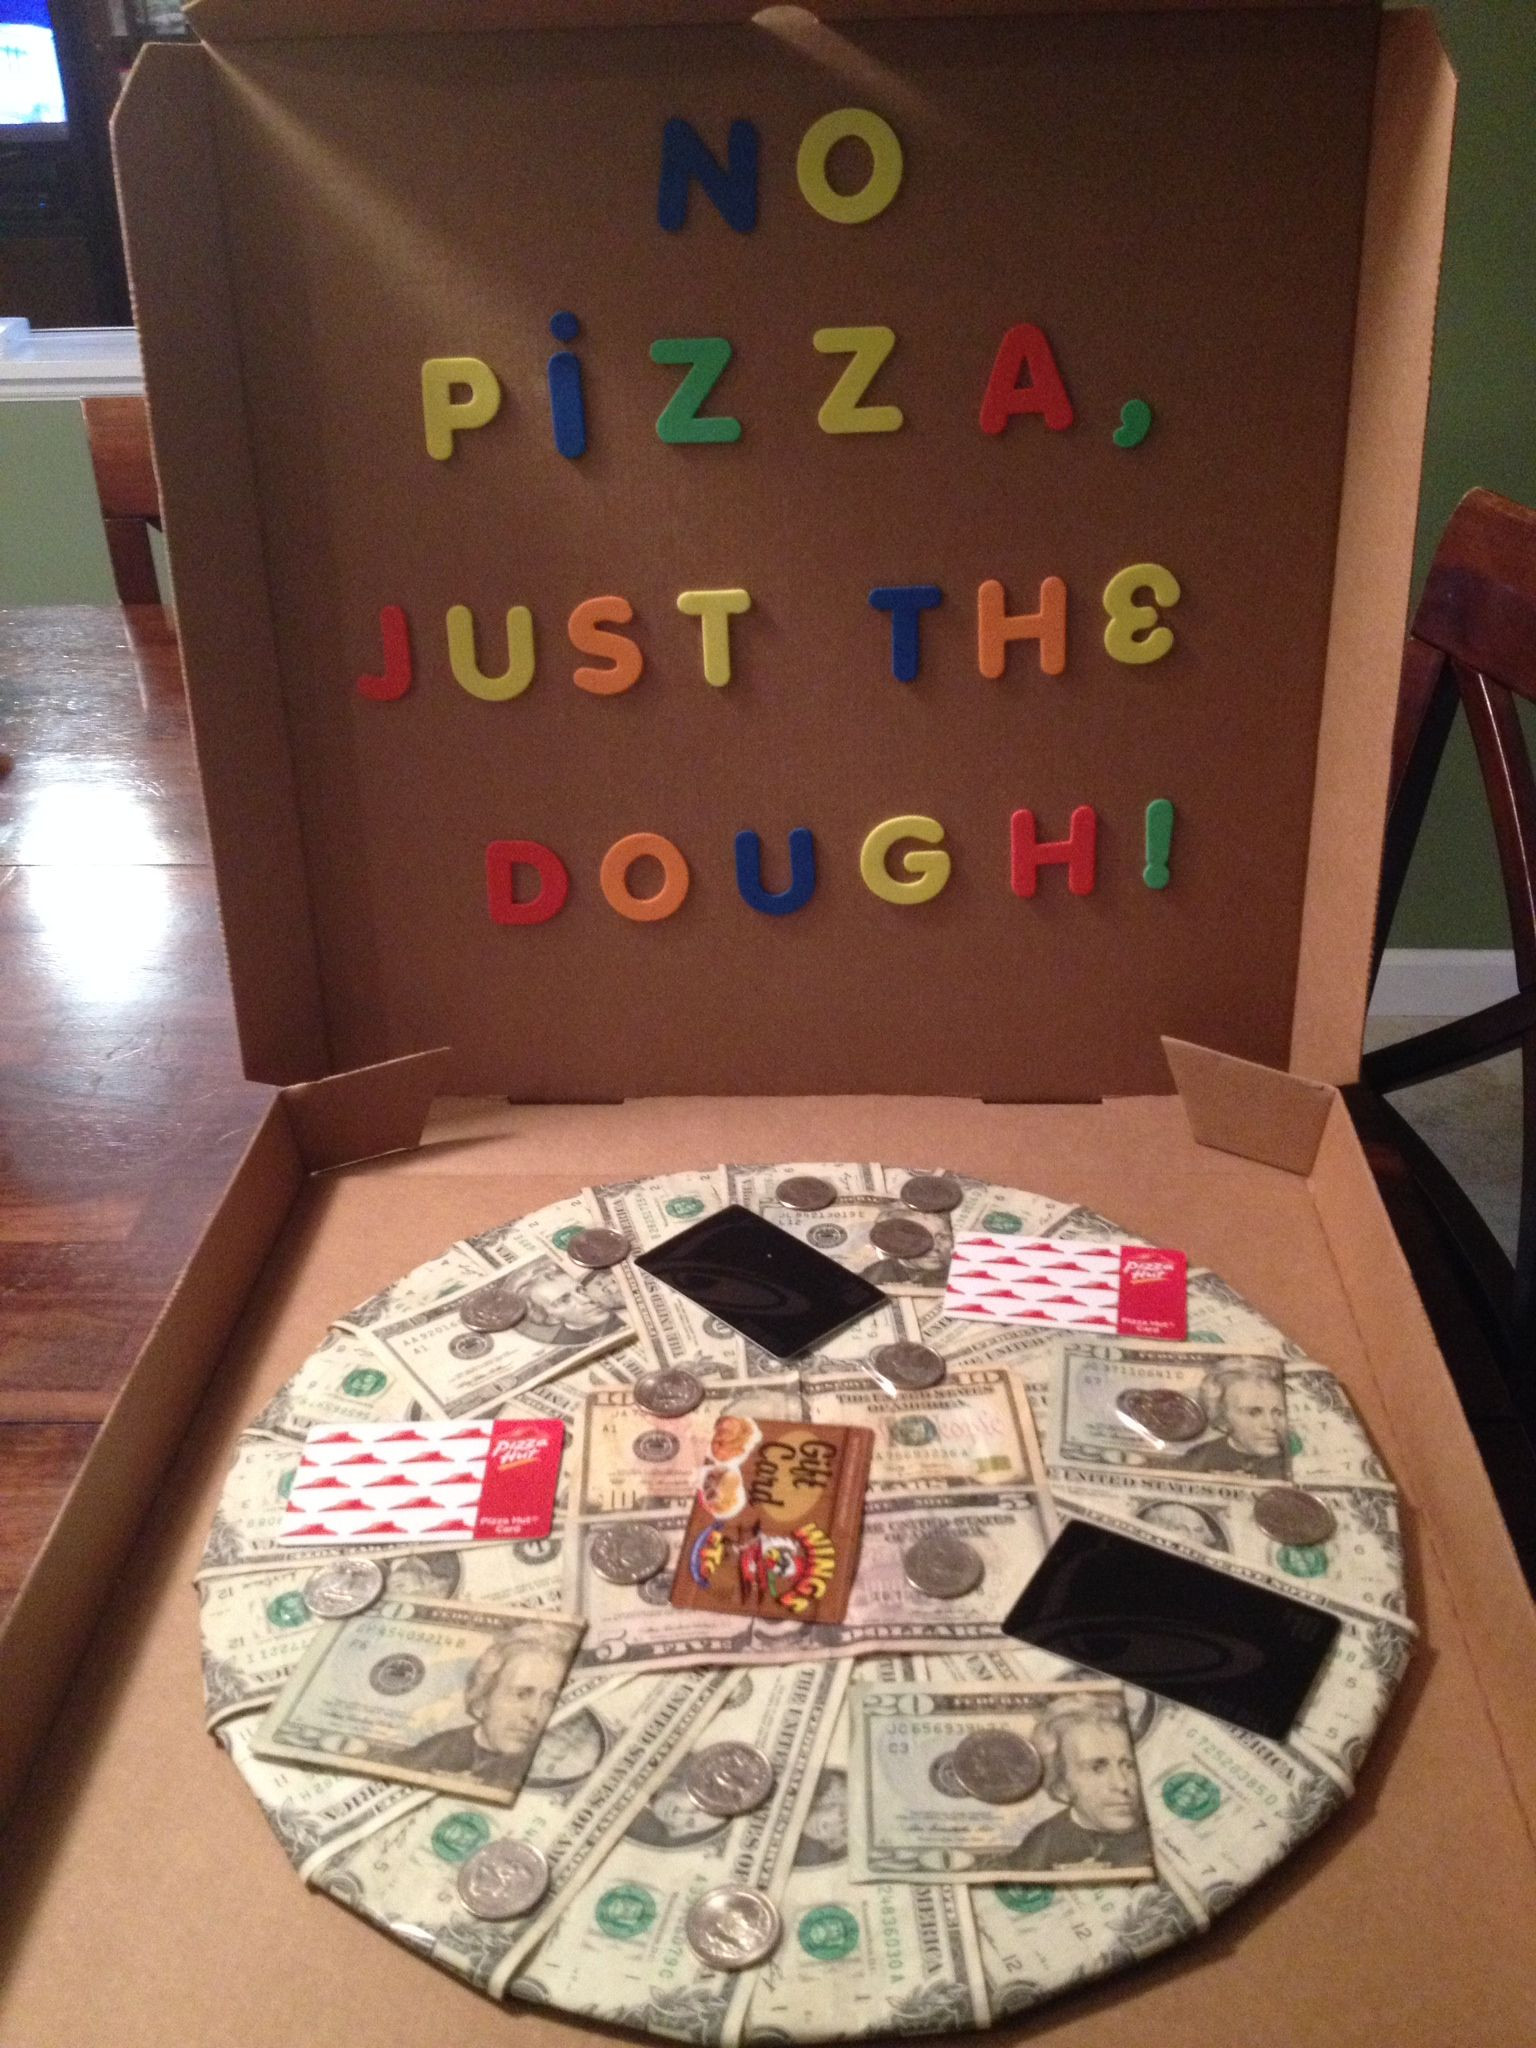 No Money Gift Ideas For Boyfriend
 No pizza just the dough Made this for my son s 19th